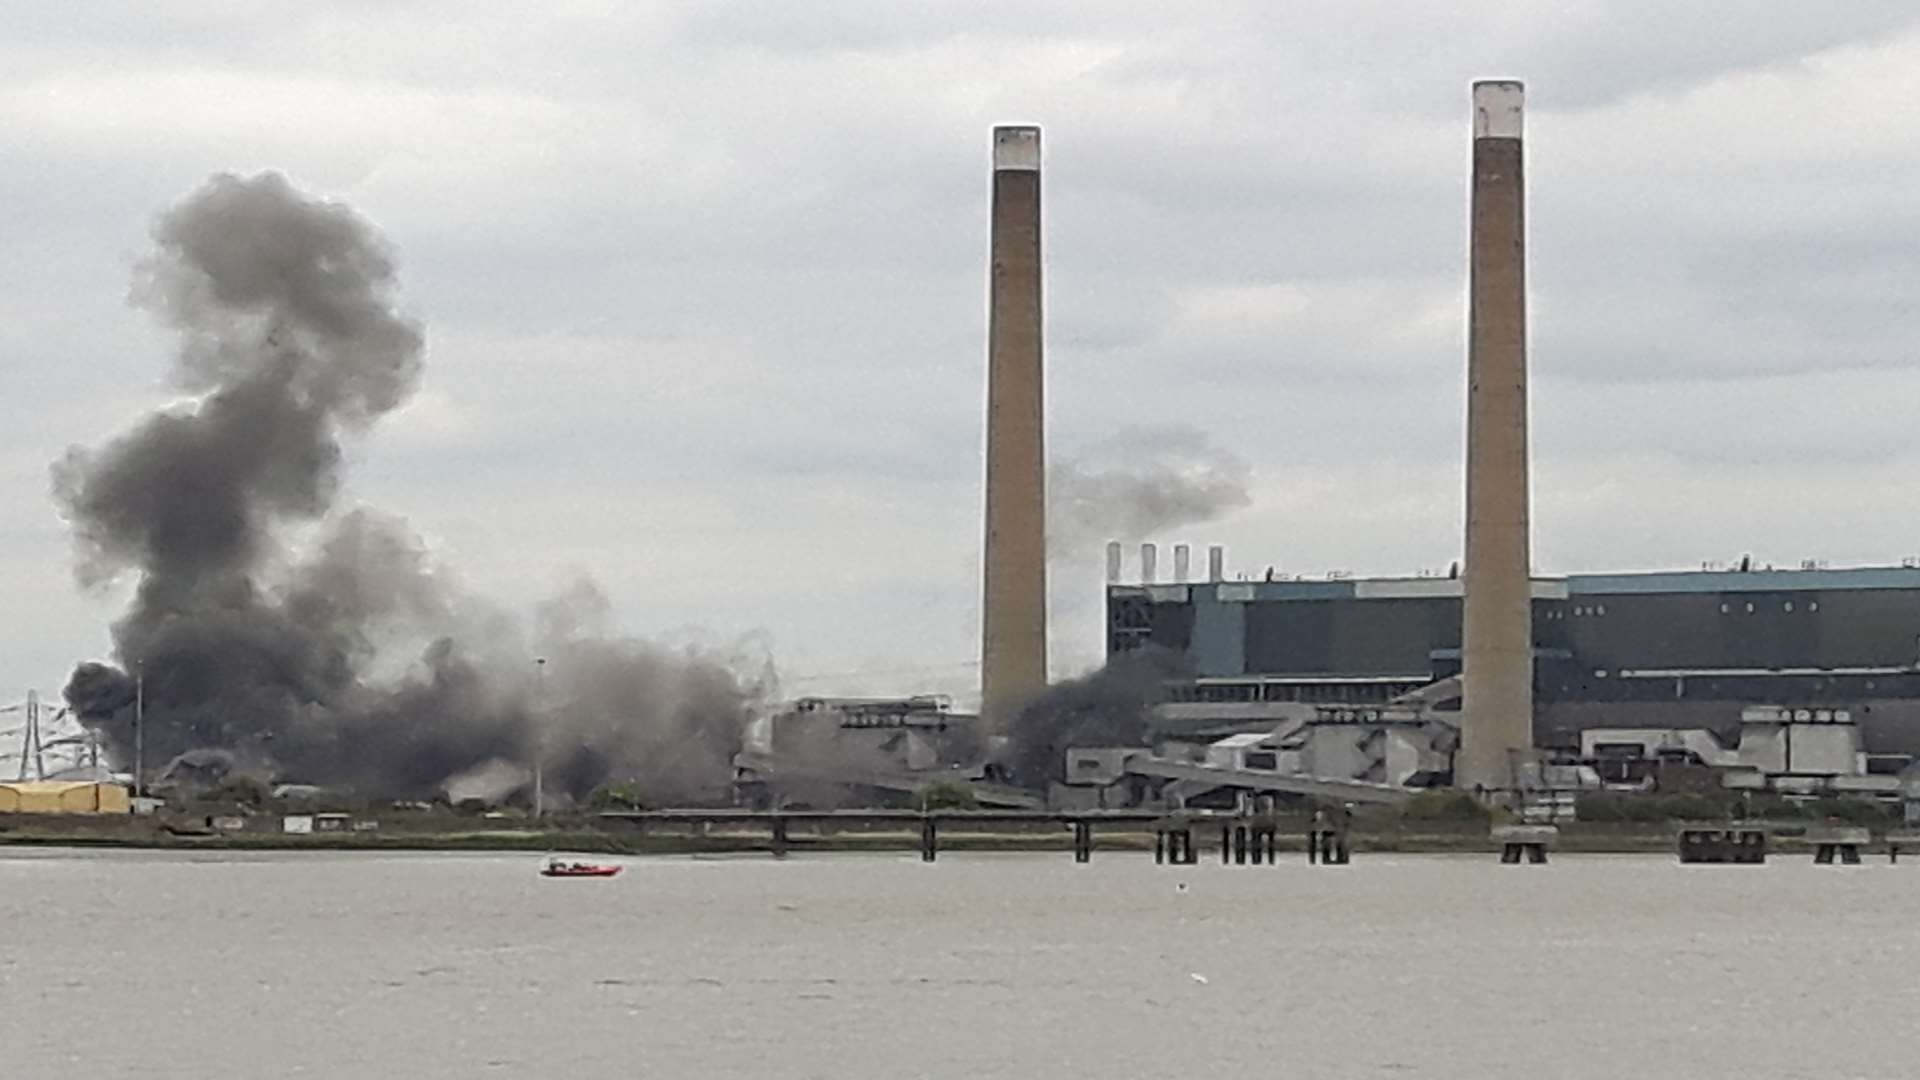 The demolition at the power station